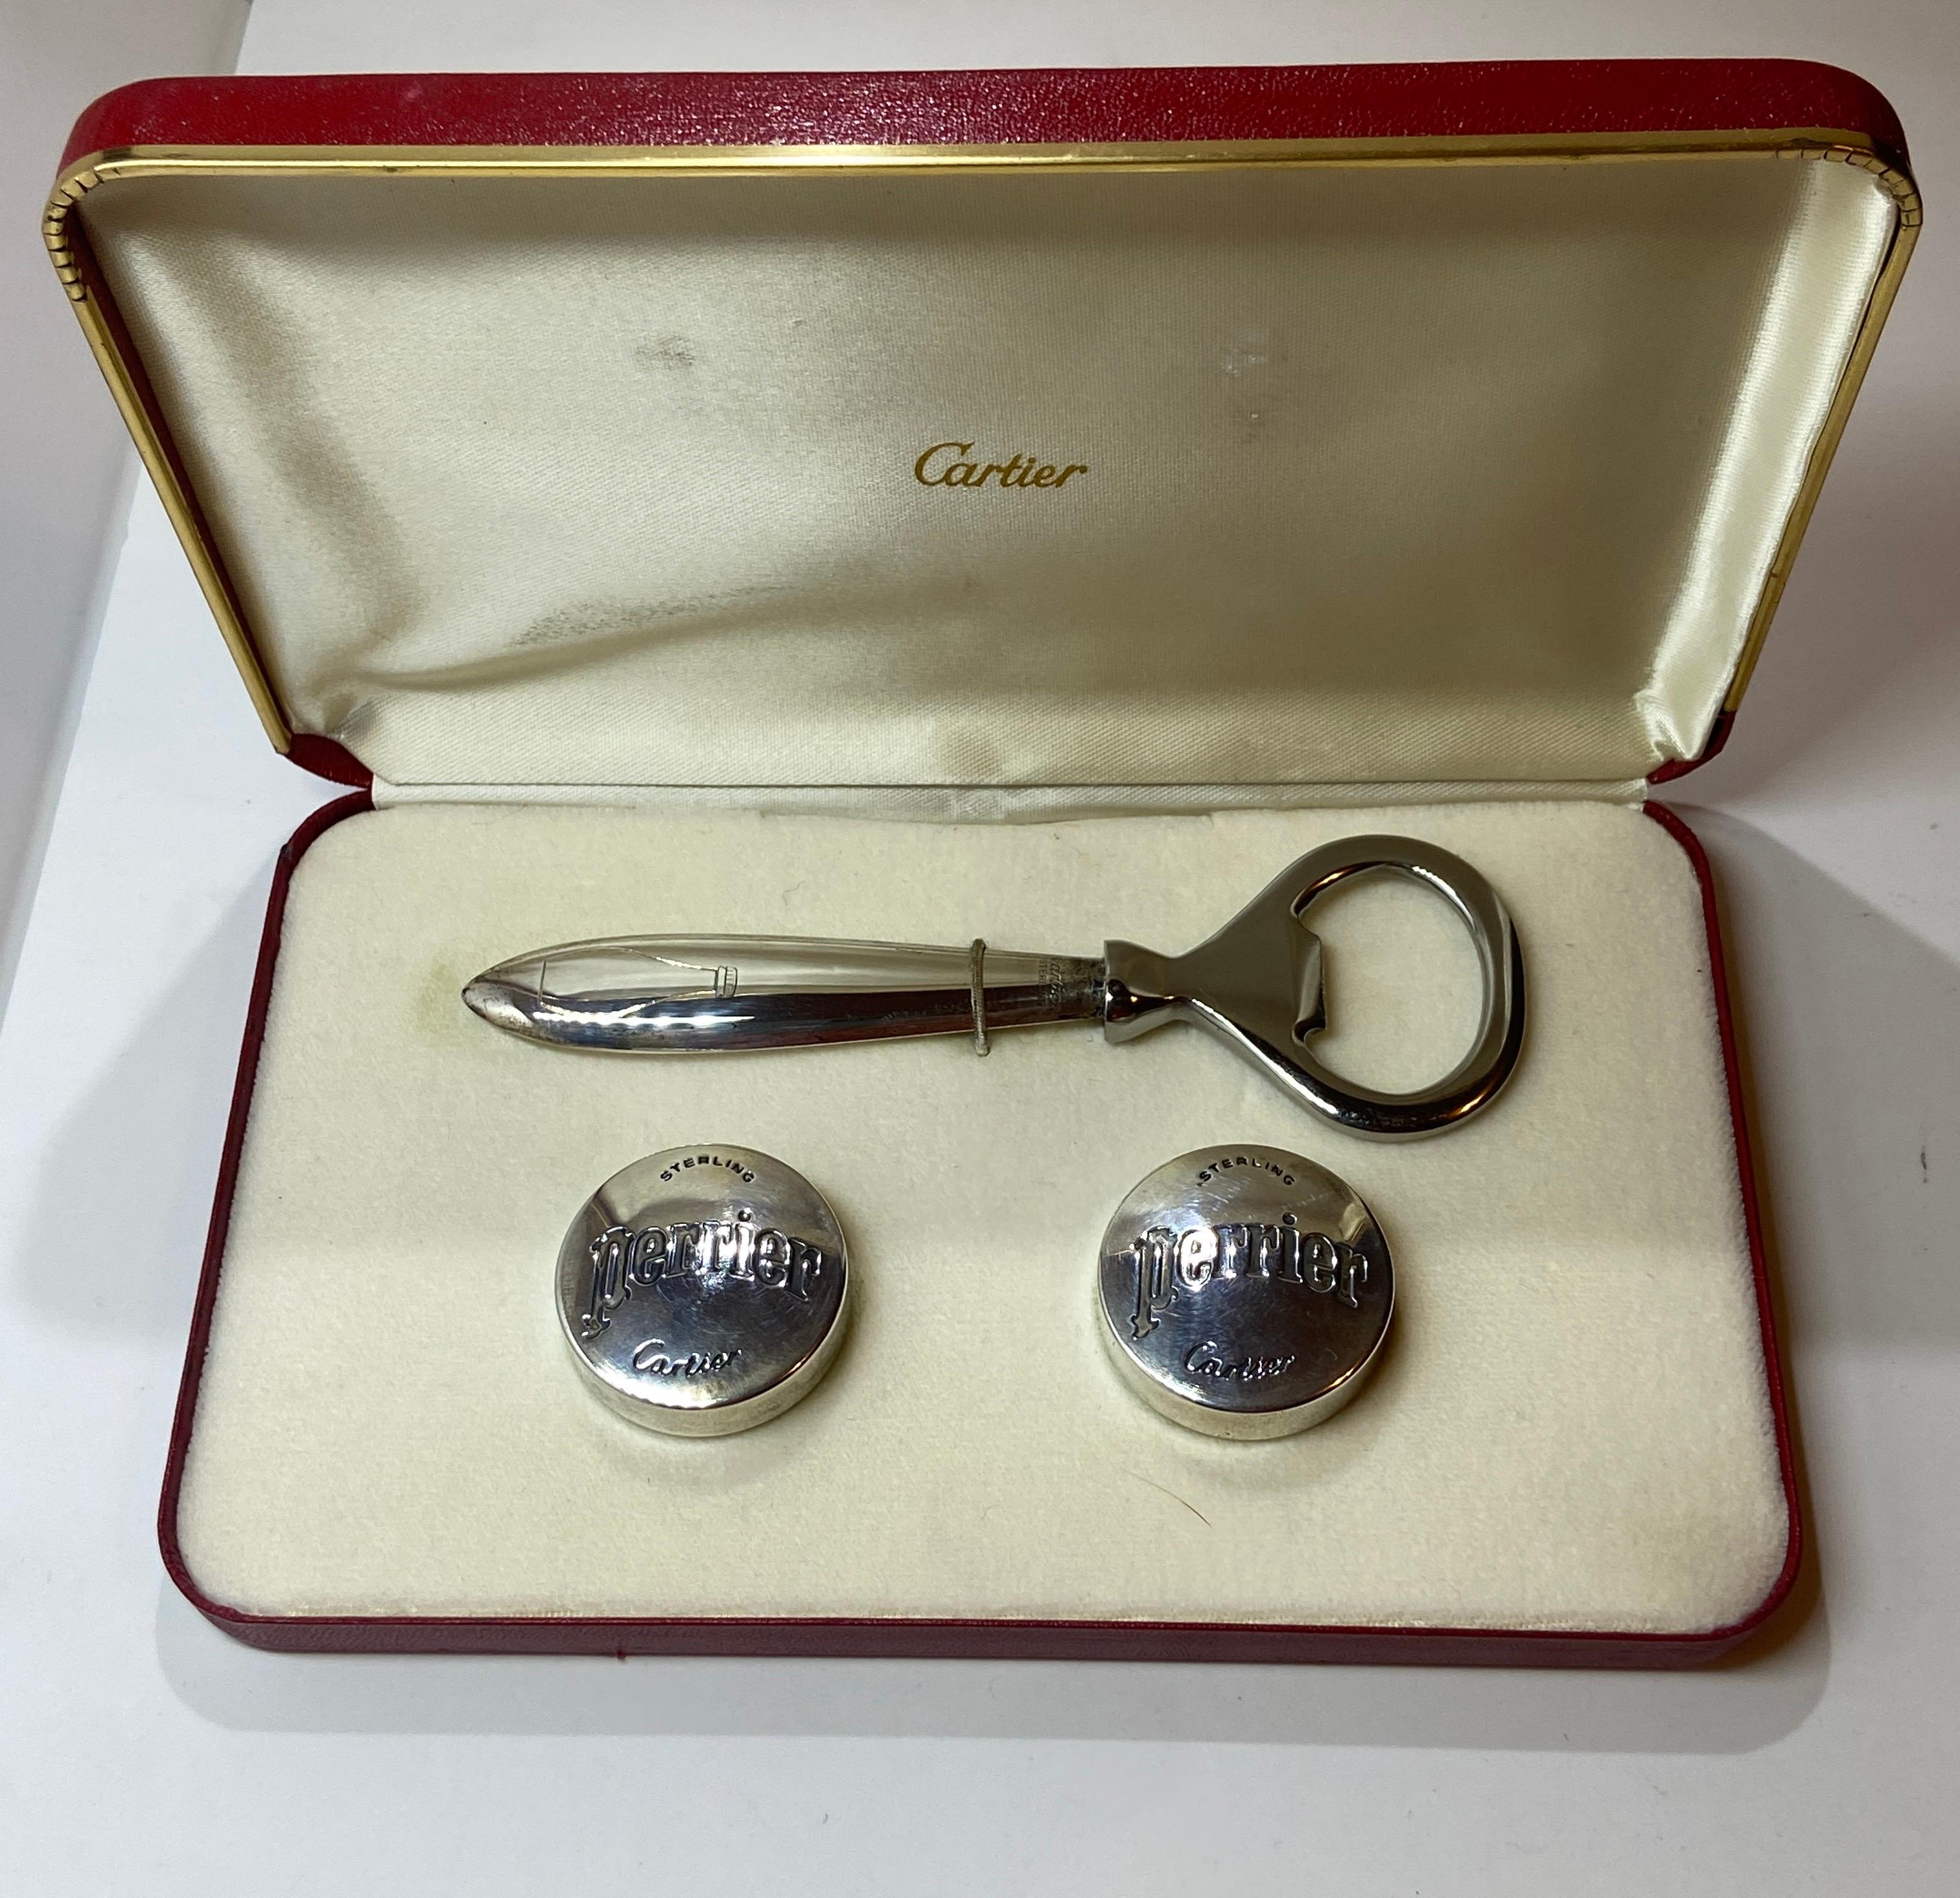 Cartier's wonderfully whimsical sterling silver bottle opener and set of Perrier bottle caps comes in original signature box. The bottle caps measures 1 2/8 inches in circumference each. The bottle opener measures 5 inches by 1 5/8 inches. Made in